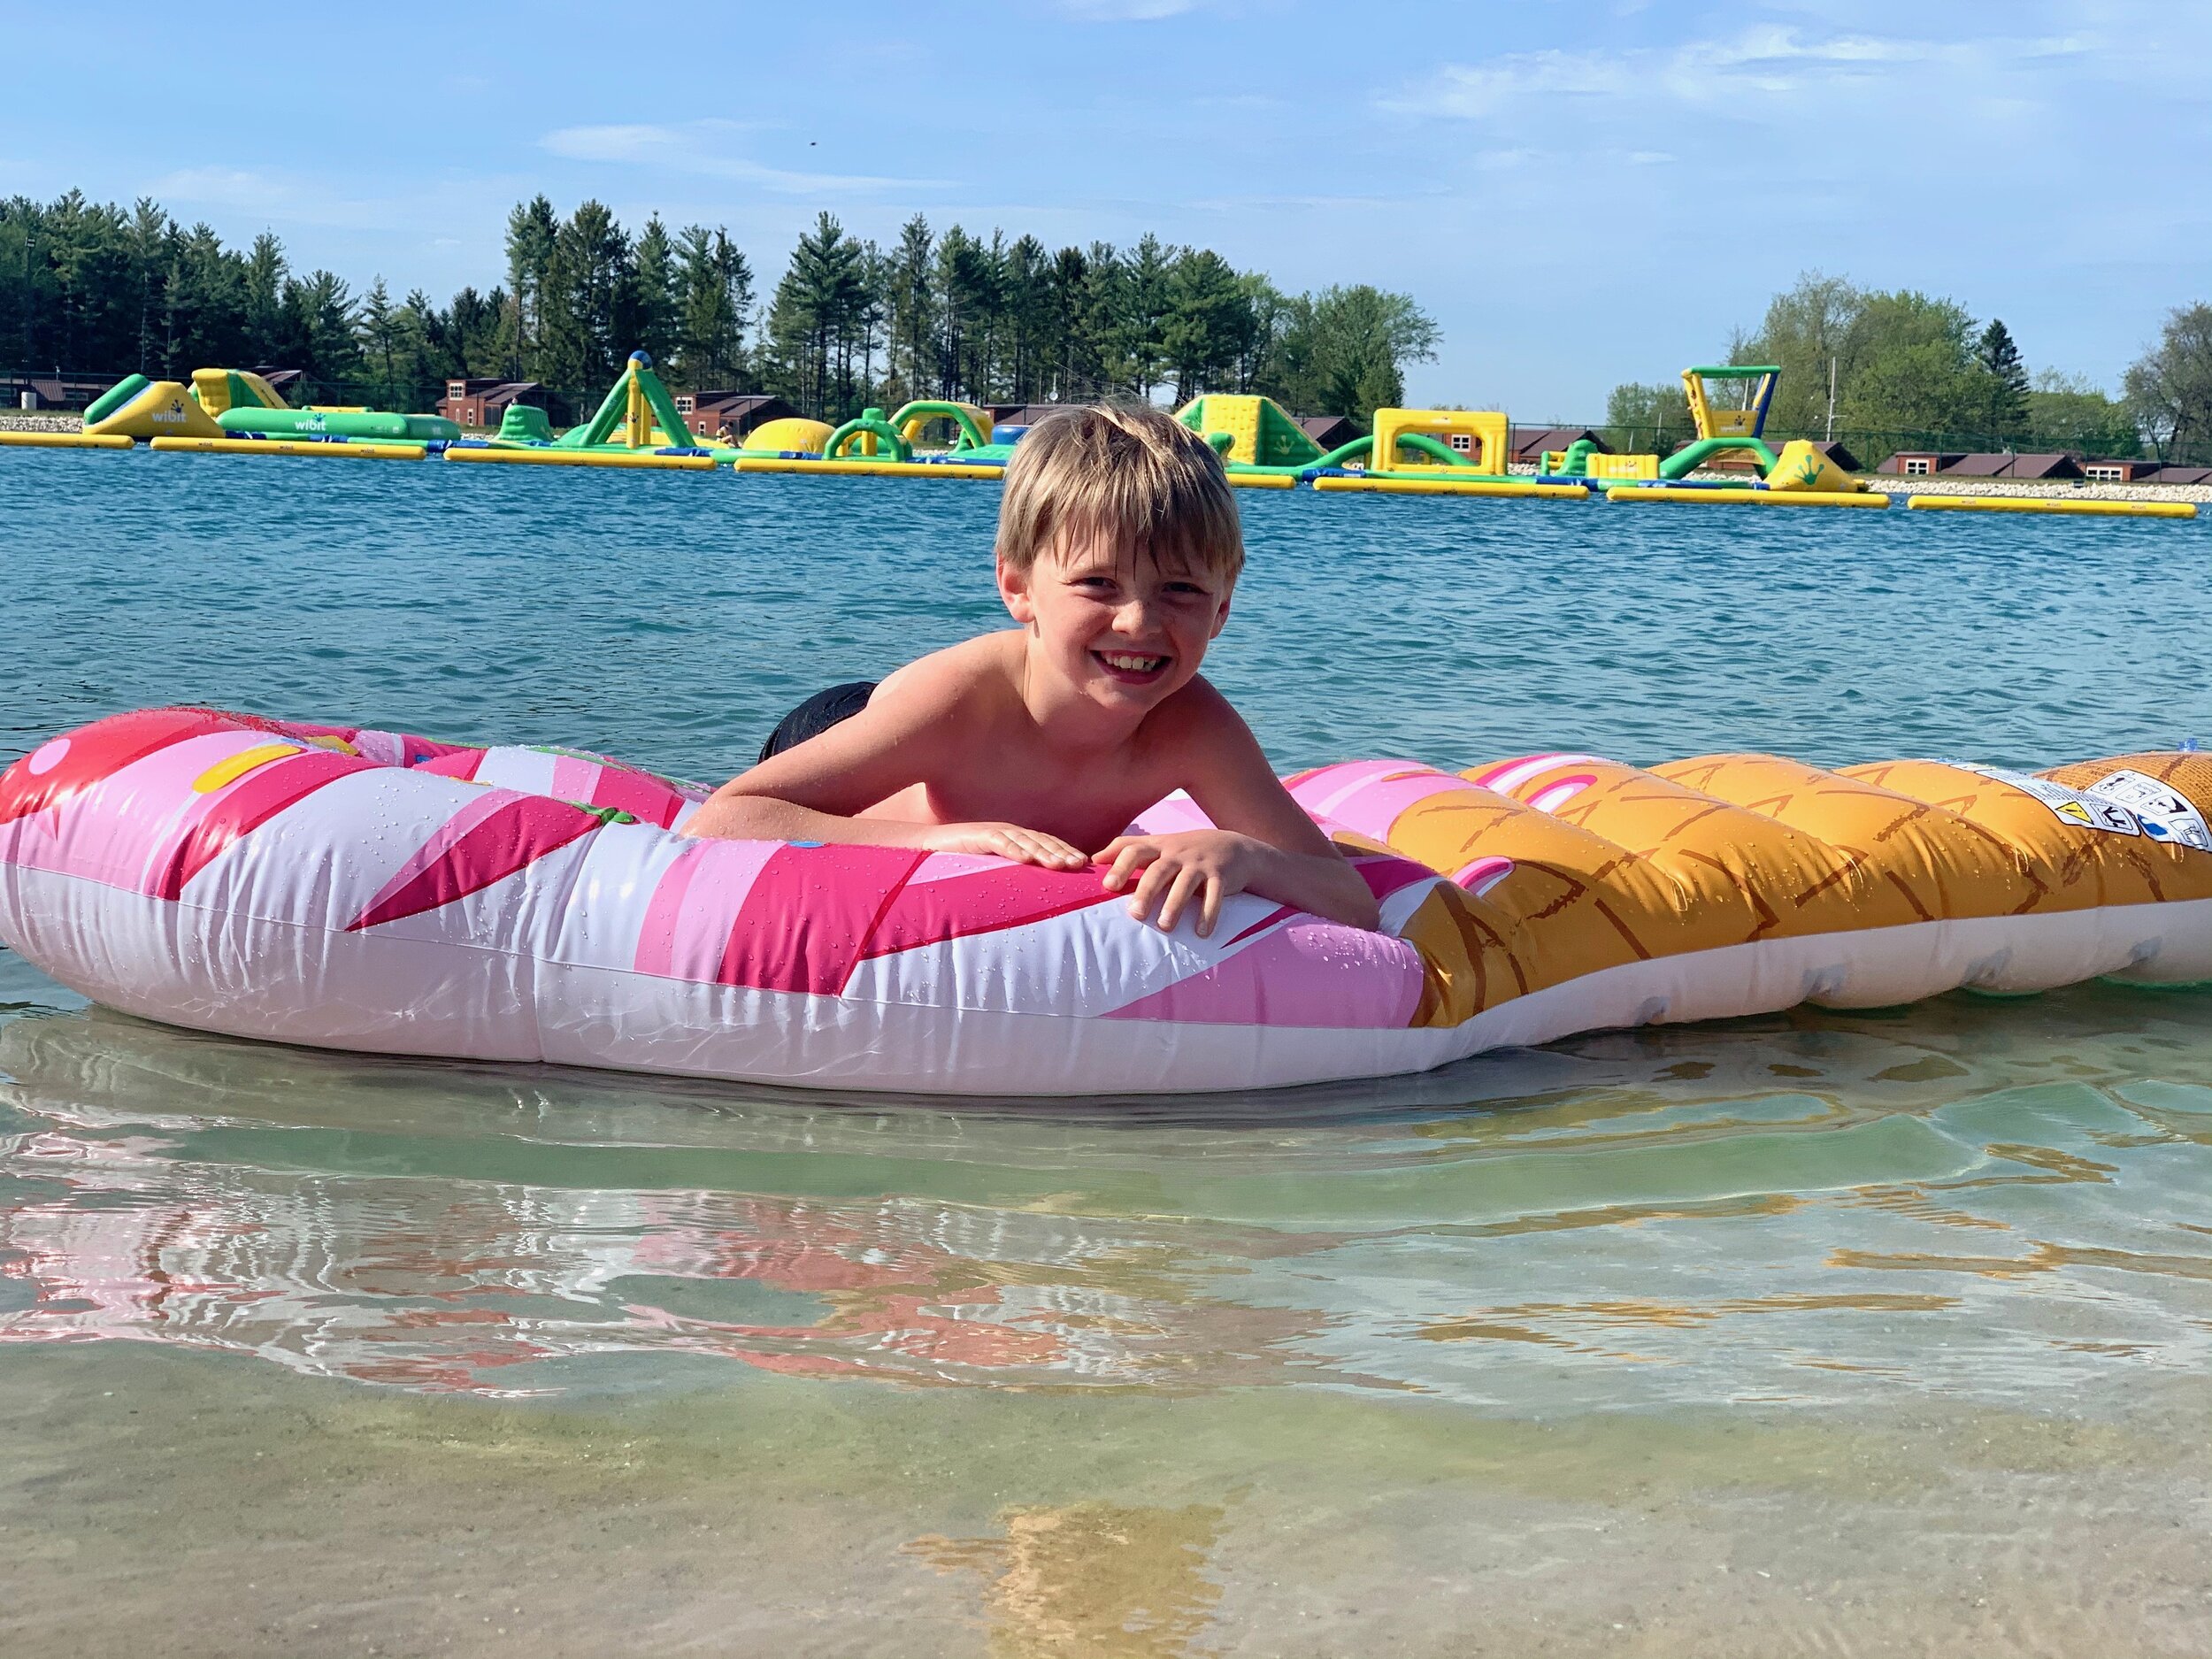 Opening Weekend at Bear Paw Beach — Jellystone Park™ Camp-Resort in